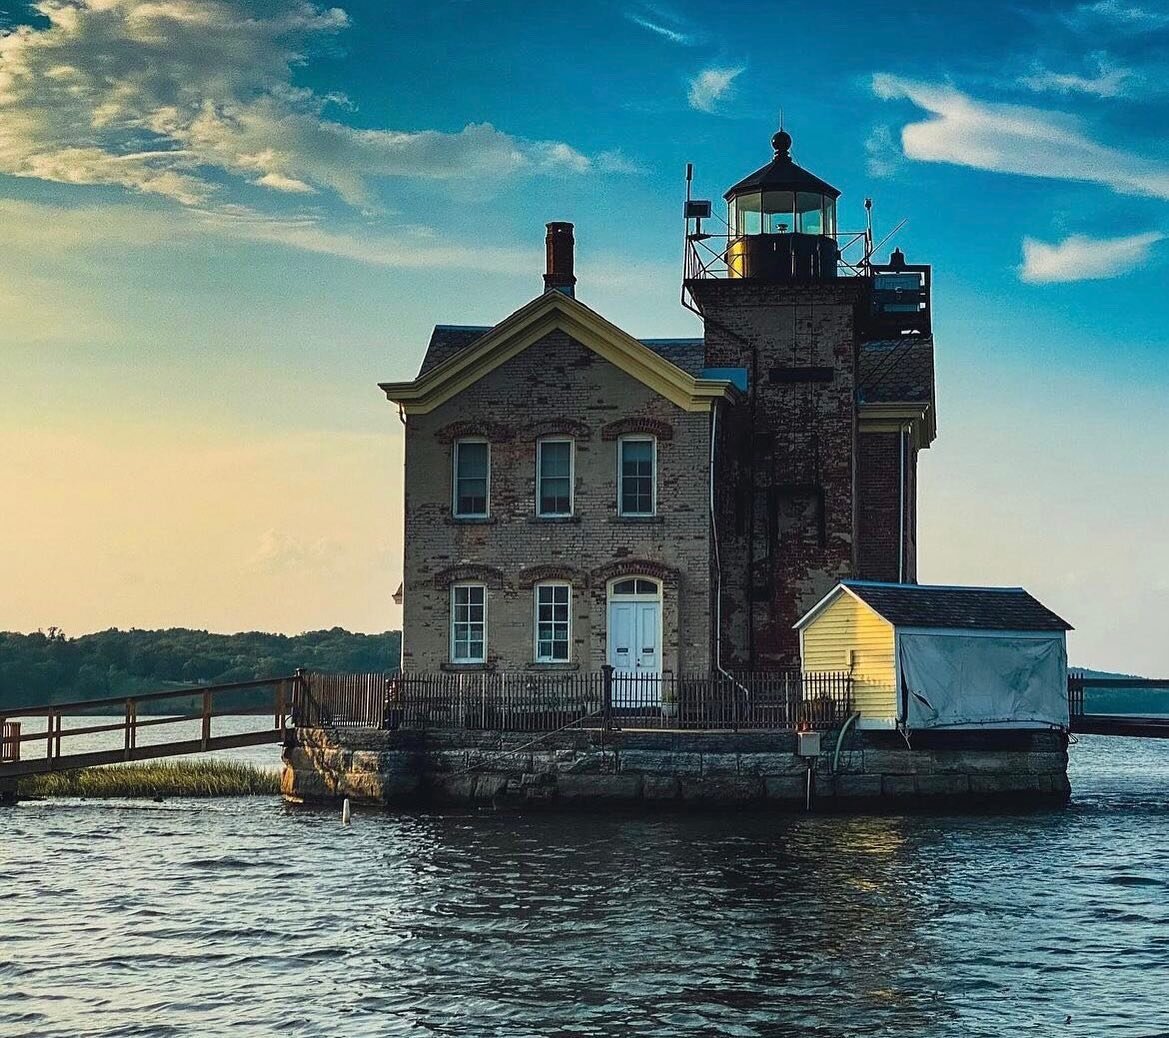 Good morning world! It will be a gorgeous day in Hudson Valley today! Come visit Saugerties&rsquo; Lighthouse @saugertieslighthouse , it is a super easy hike and feels like you are on a mini vacation, the path is sandy and tall grasses make a beautif